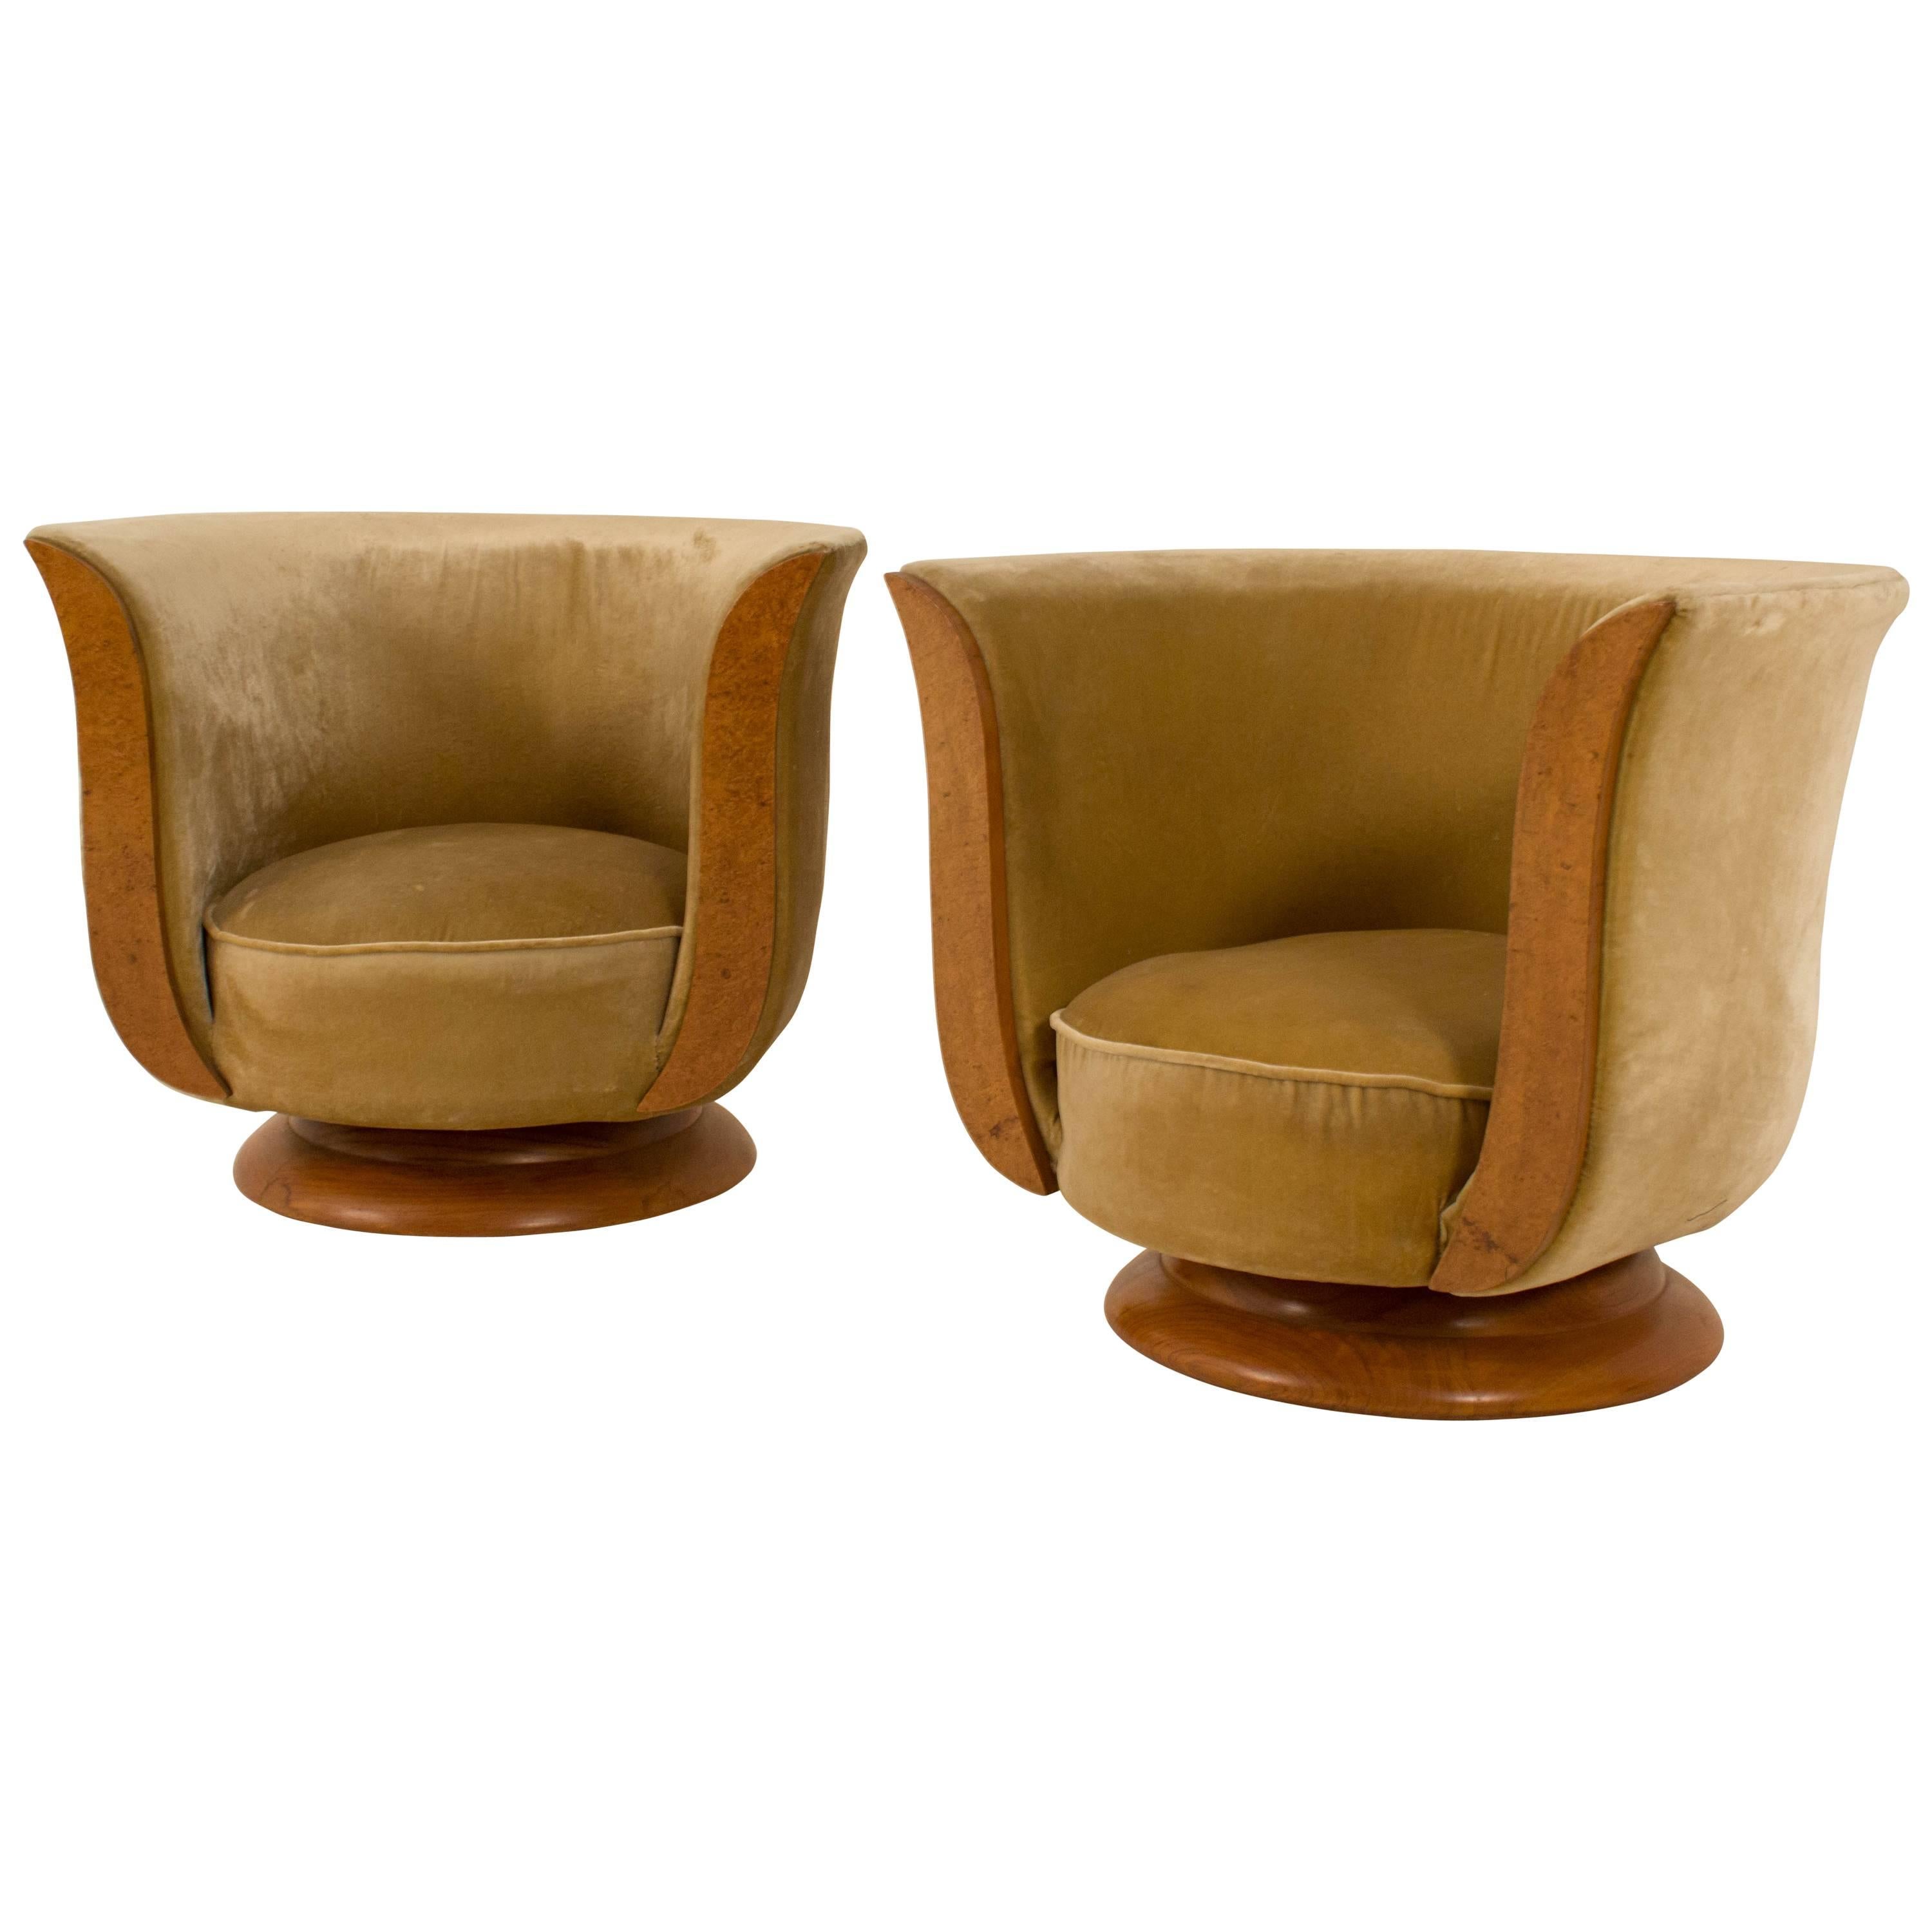 Stunning Pair Of Art Deco Lounge Chairs For Hotel Le Malandre 1930s